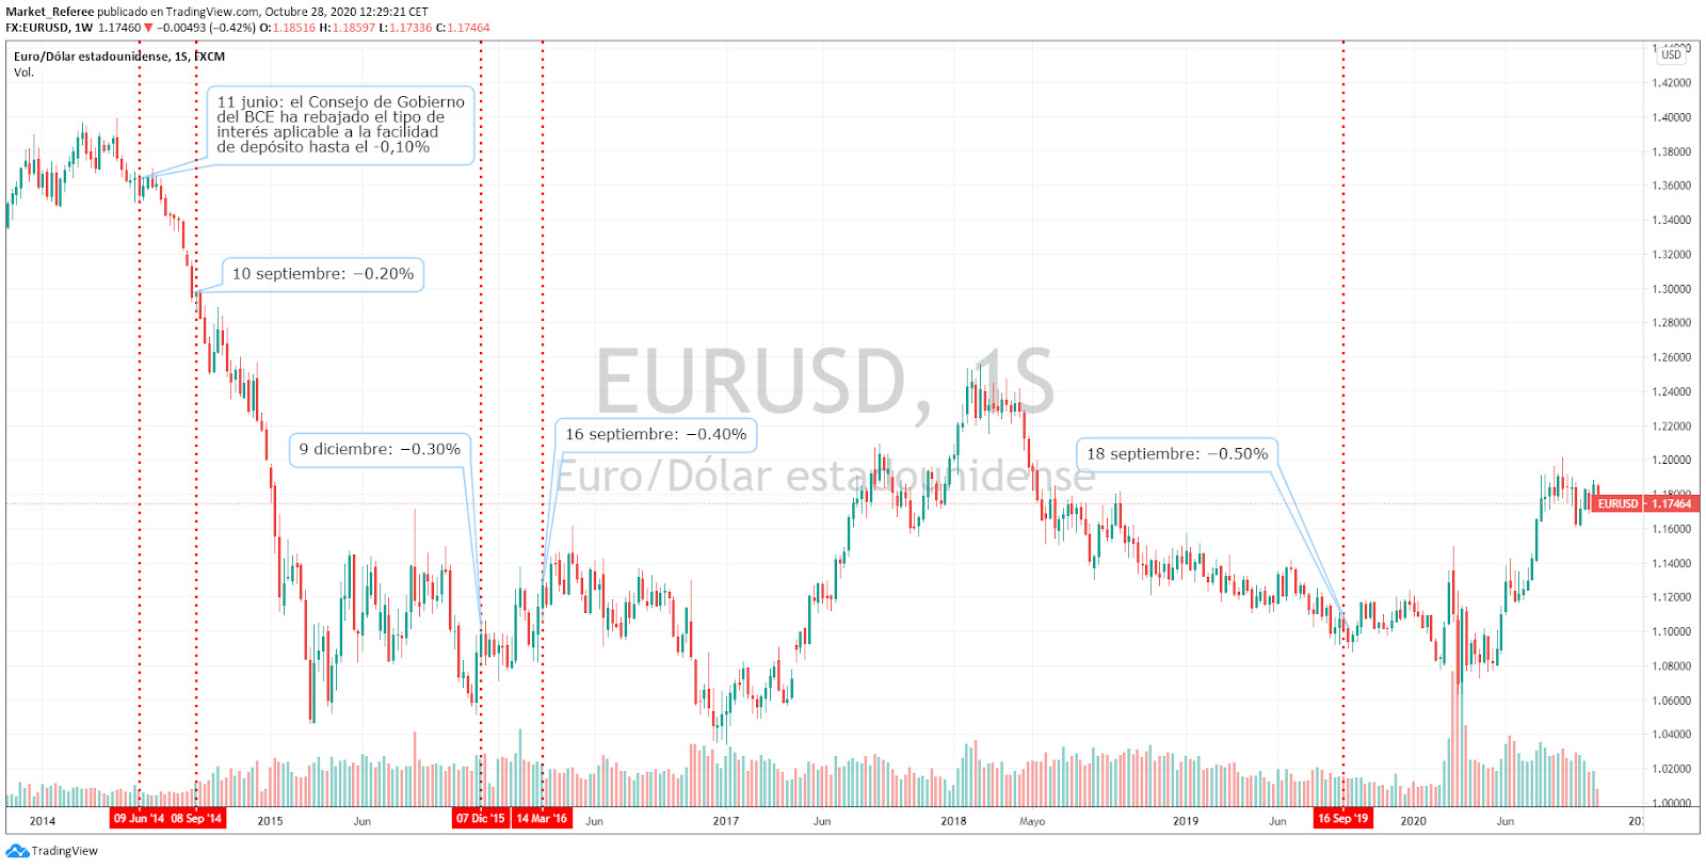 Evolution of the currency pair euro/dollar.